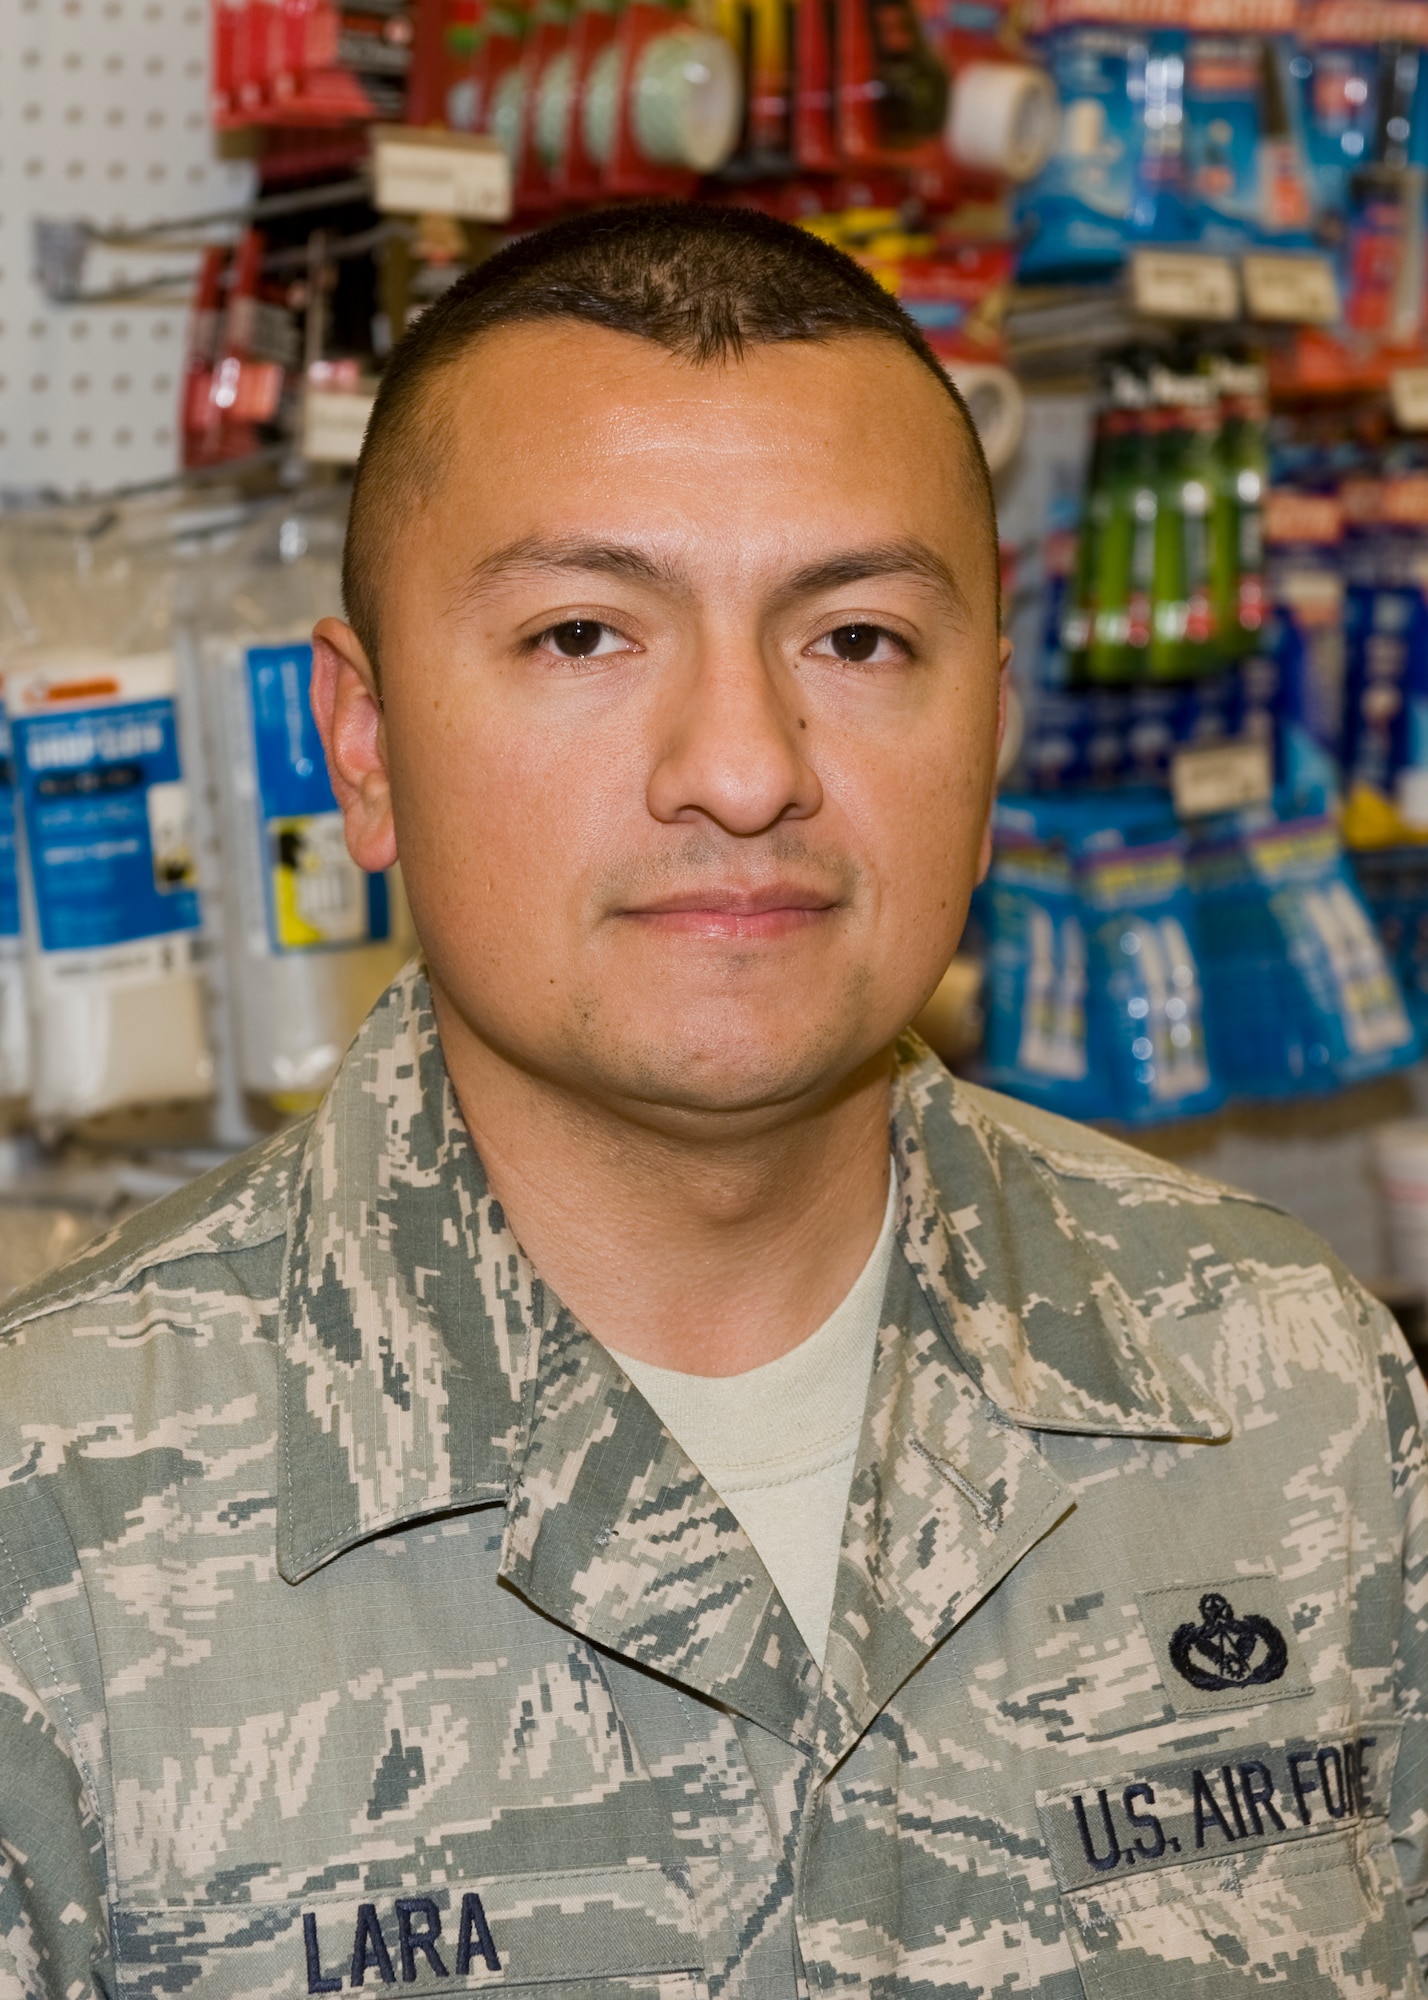 "First thing is just the fact that I’m here. It seems like I’m here one year and gone the next. So my ideal Valentine’s Day would be spending time with the family and being able to be home with them." - Master Sgt. Manuel Lara, 7th Civil Engineering Squadron 